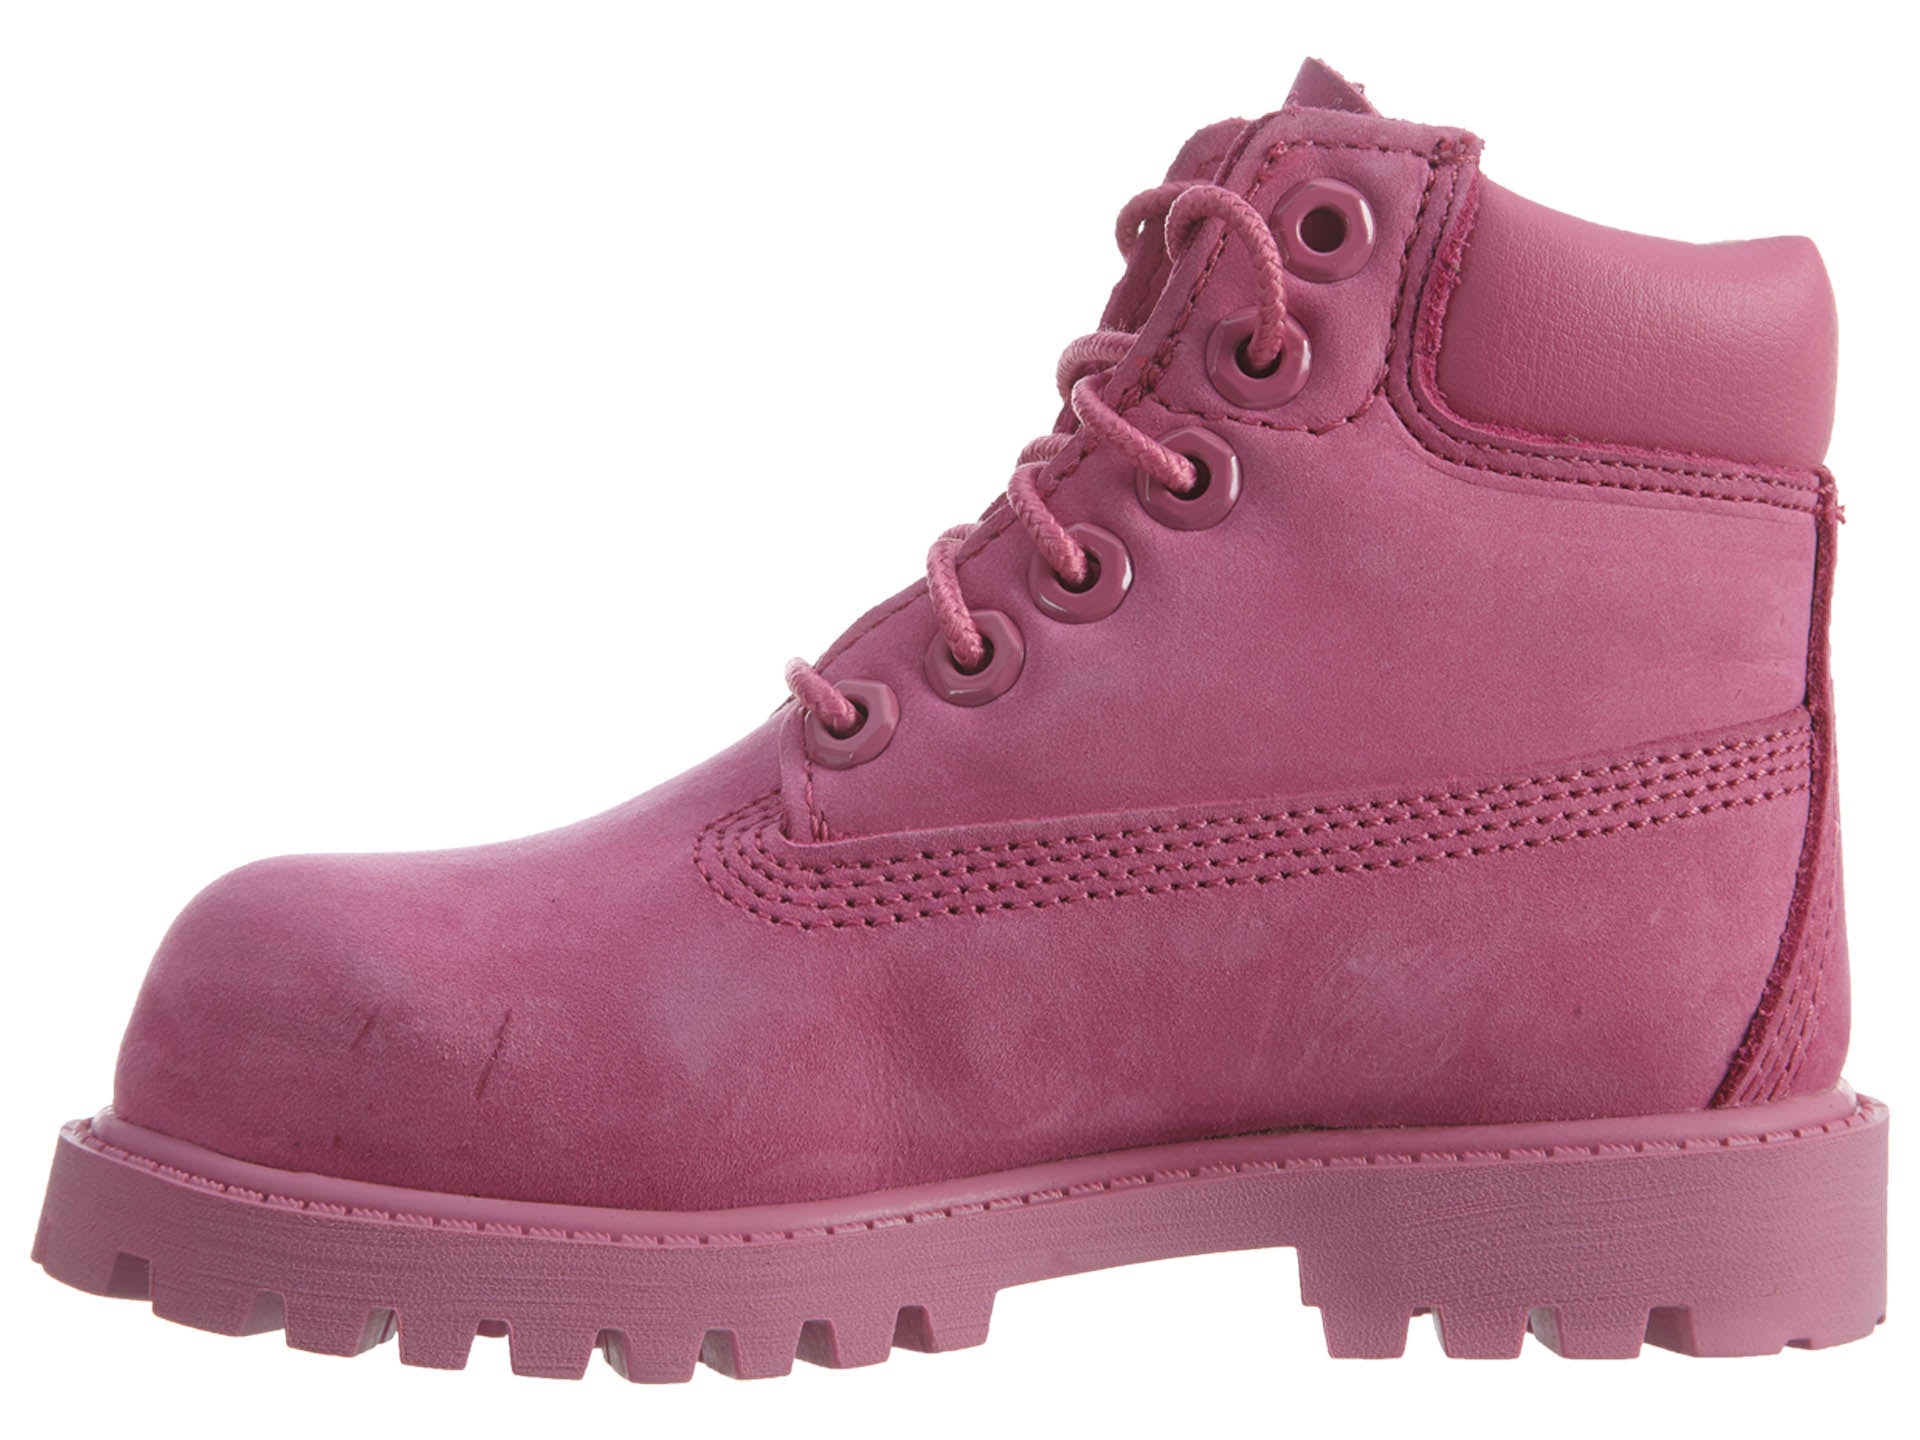 Timberland 6in Prem Boot Toddlers Style : Tb0a148l